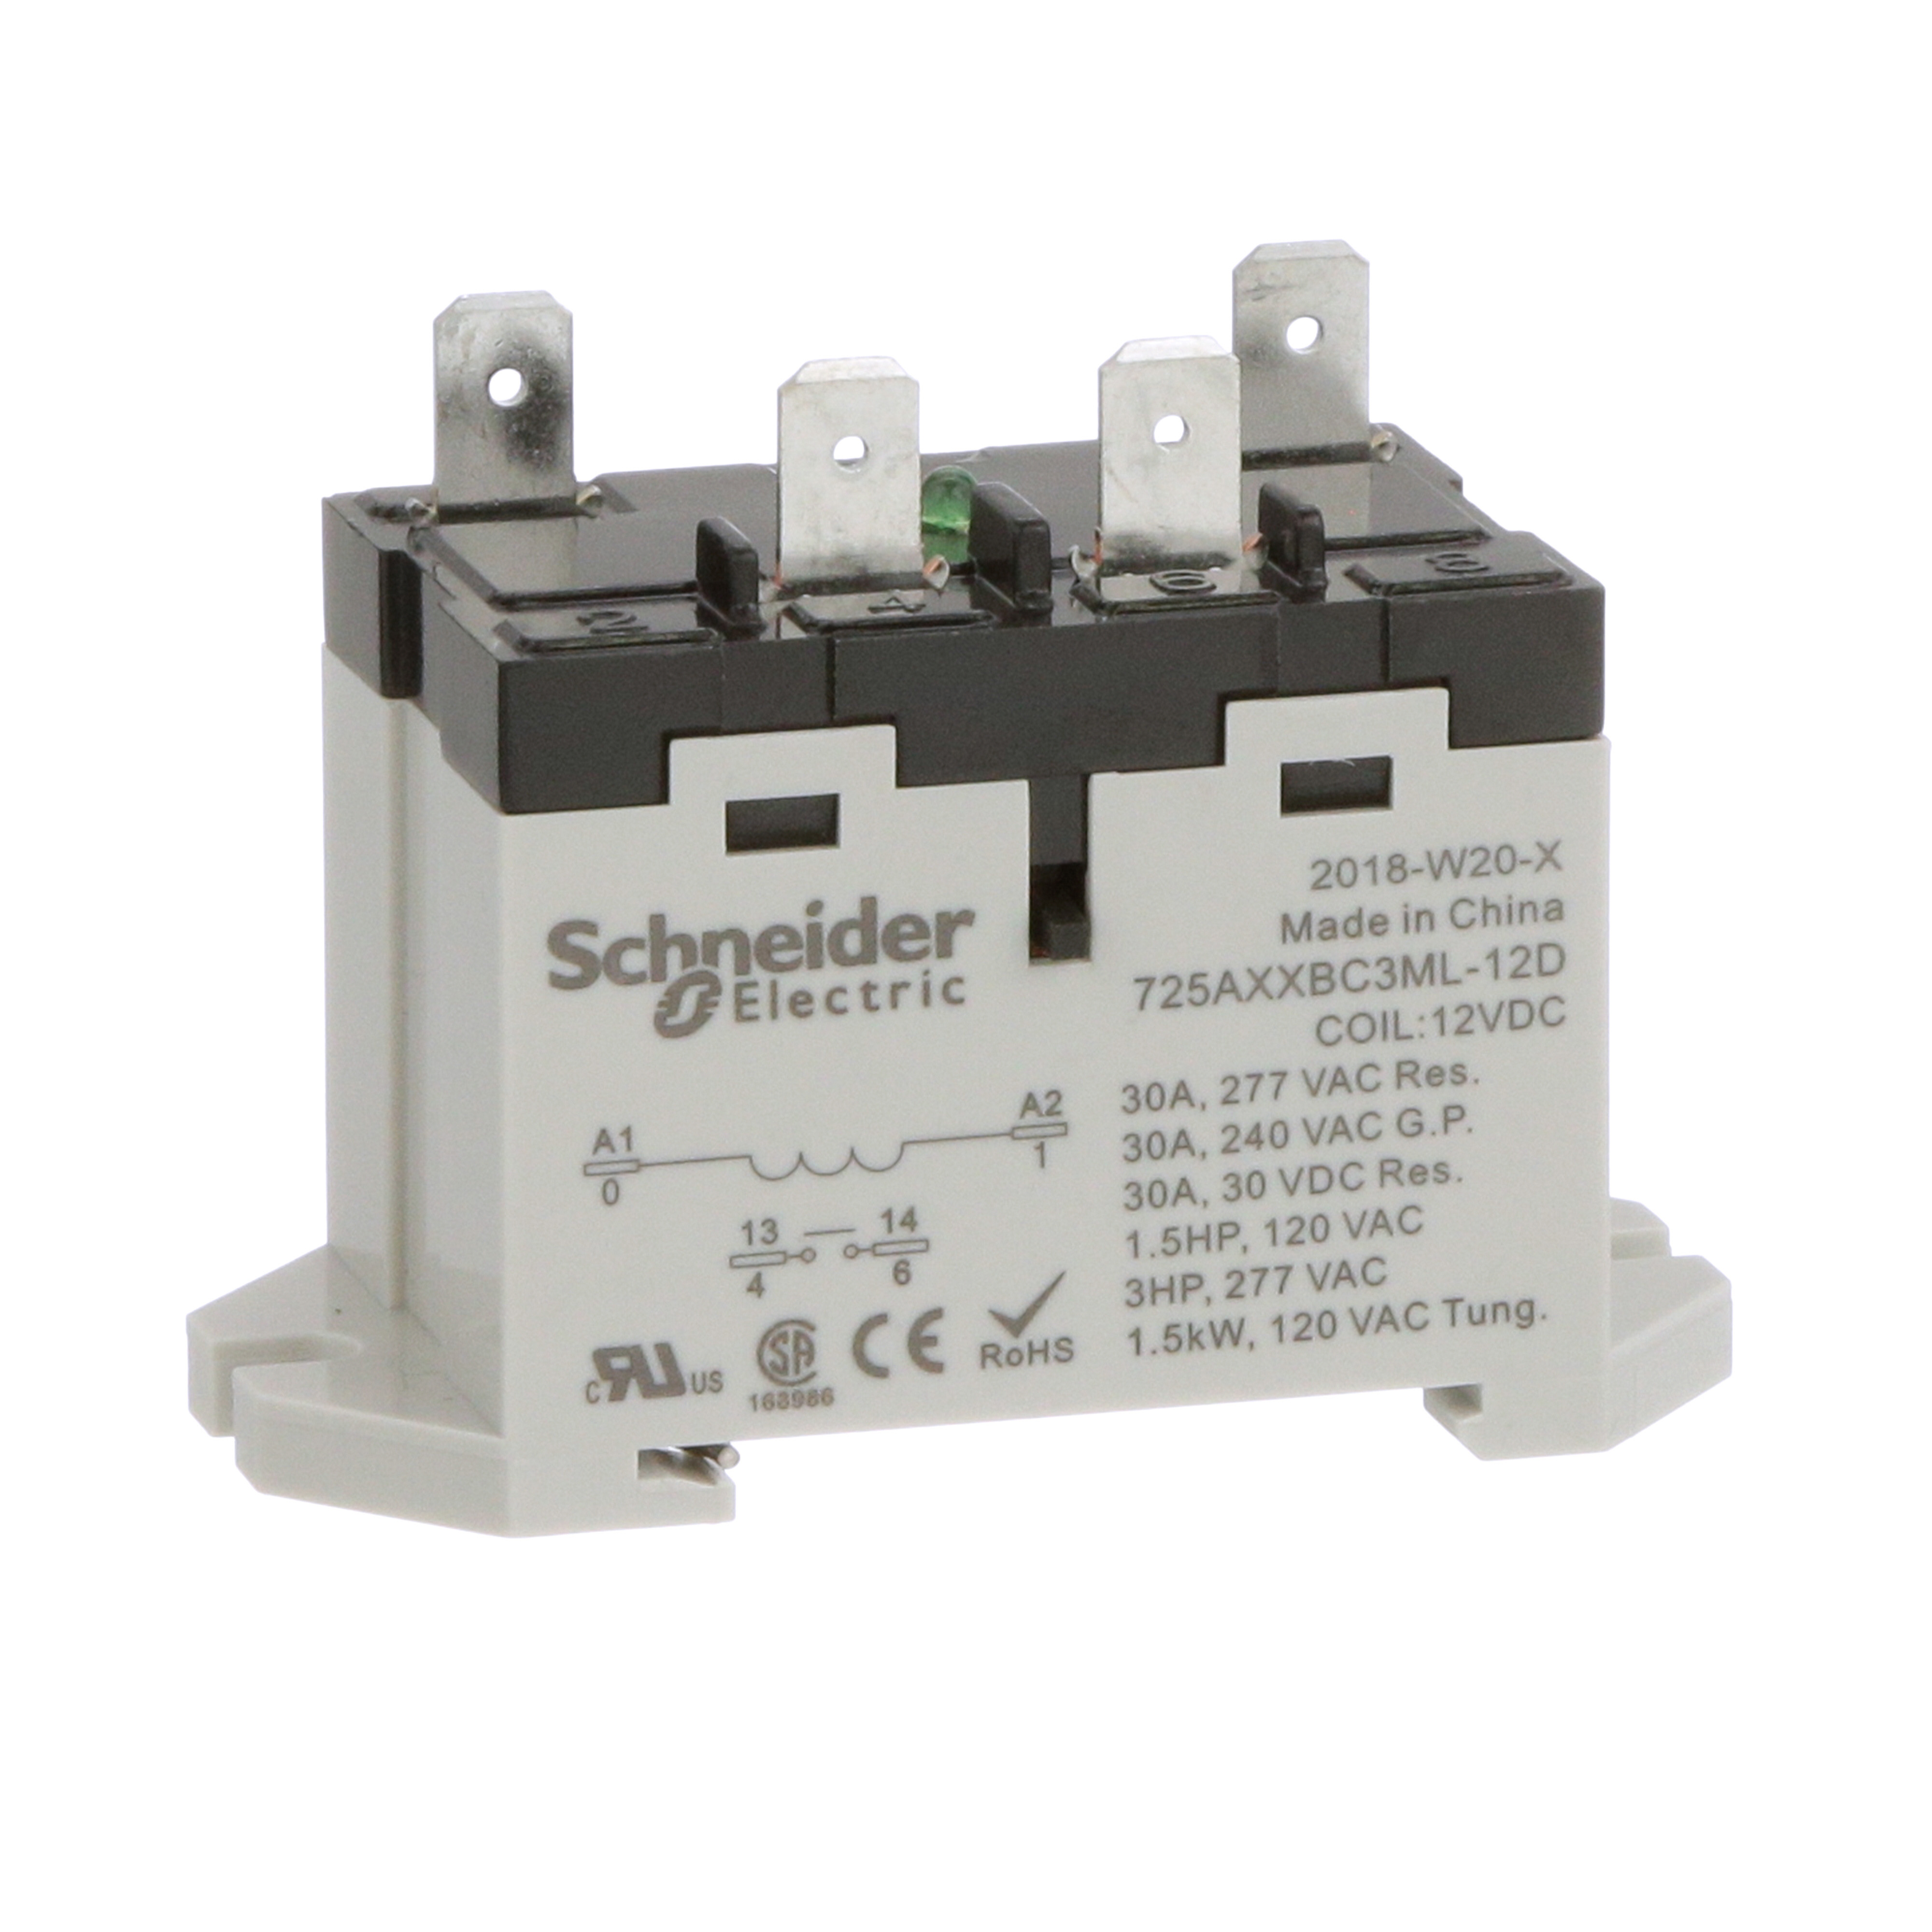 Power relay, SE Relays, 30A, 1NO, 12VDC, LED push button, blade terminals, DIN or panel mount